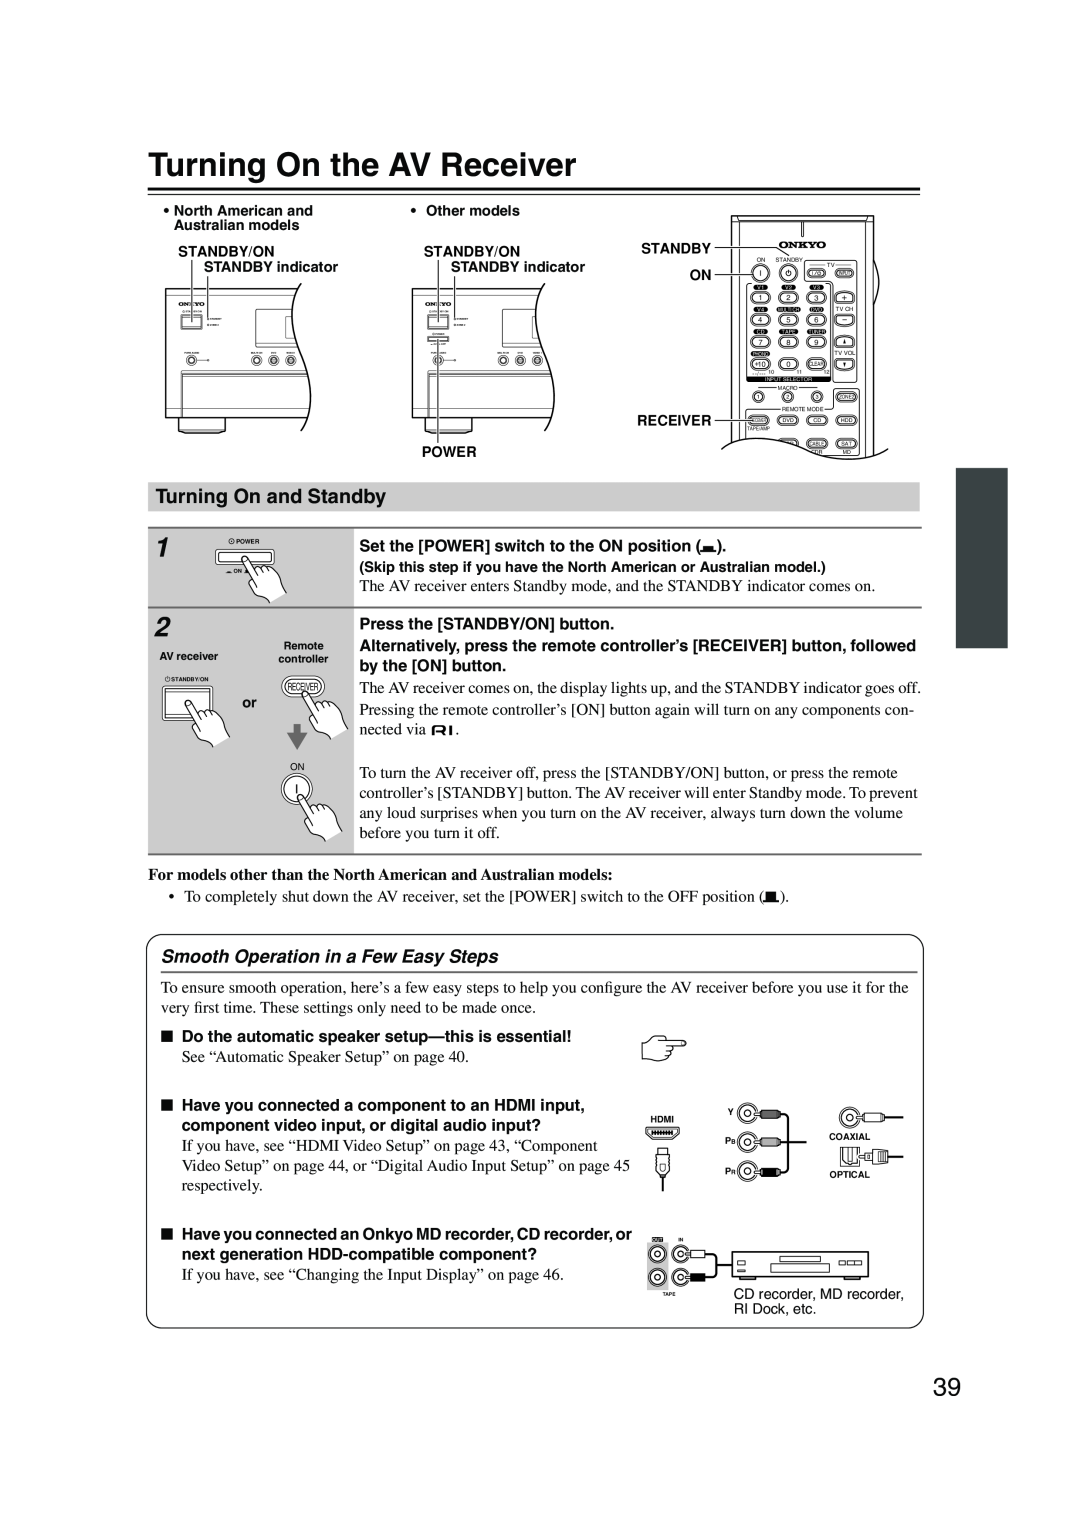 Onkyo SR804 instruction manual Turning On the AV Receiver, Turning On and Standby, Smooth Operation in a Few Easy Steps 